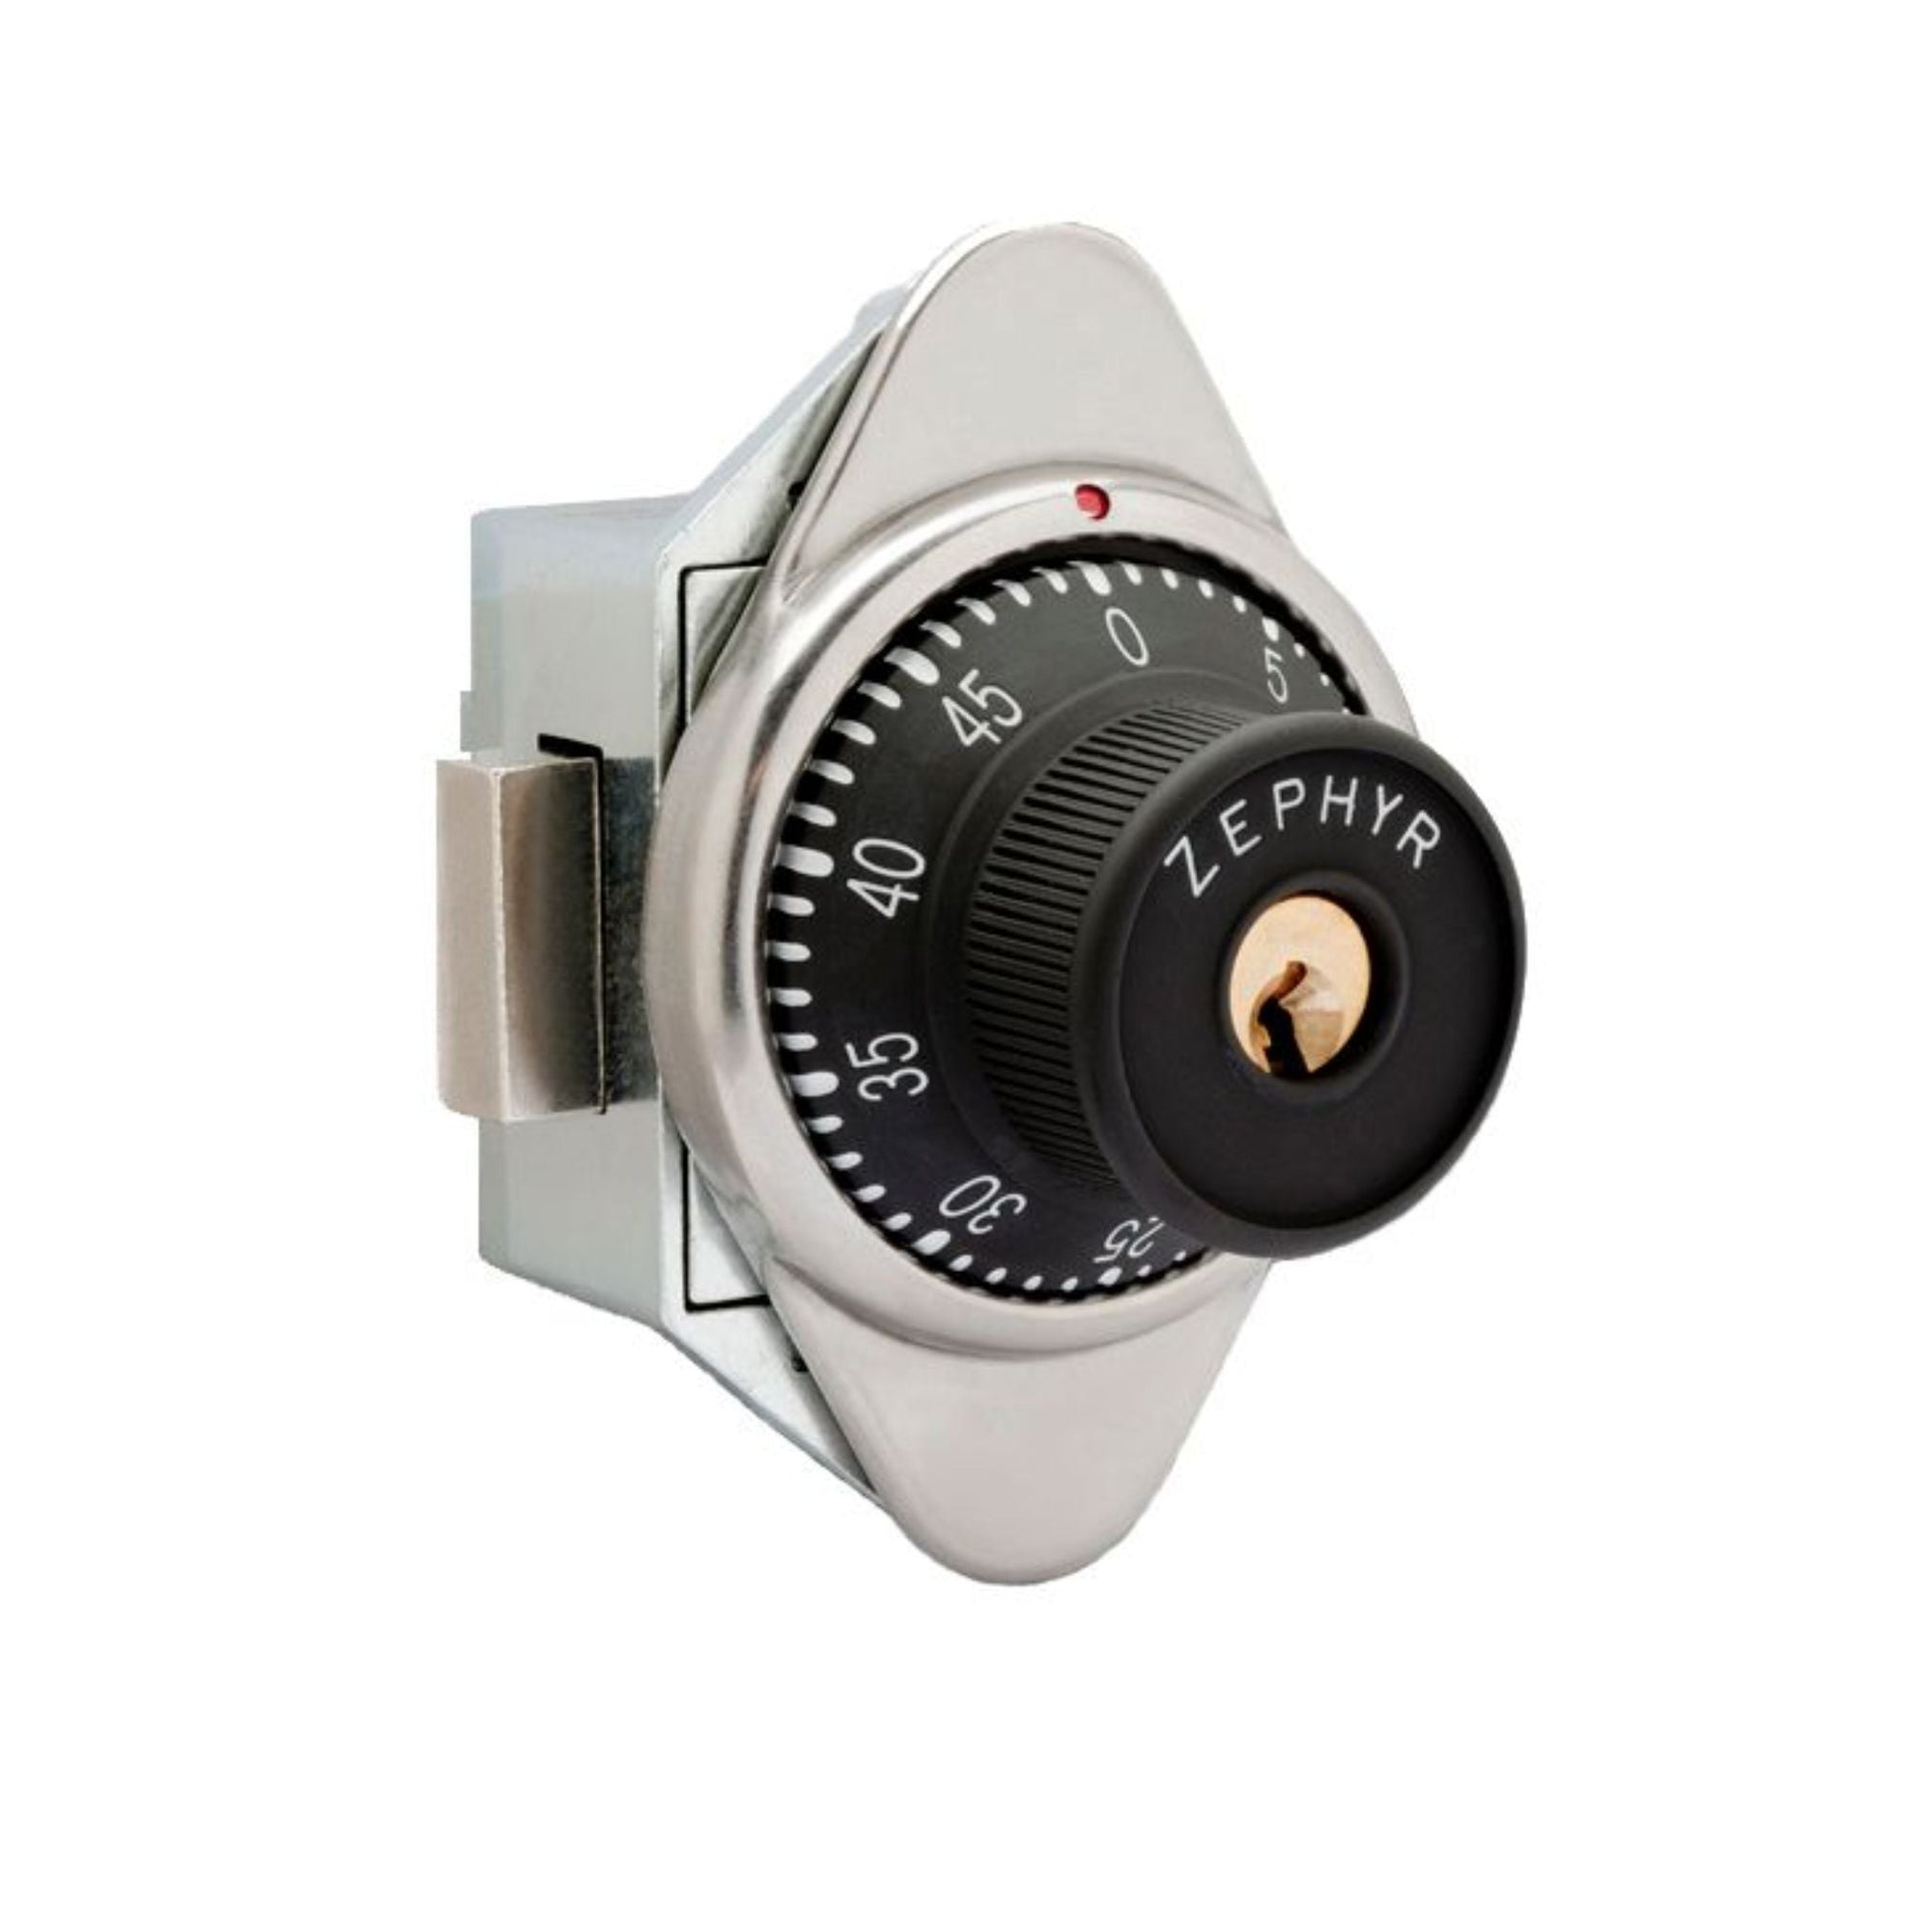 Zephyr Lock 1970 RH Built-In Combination Locker Locks Fit Are Ideal for Ventilated Lockers Where Security Can Be An Issue - The Lock Source